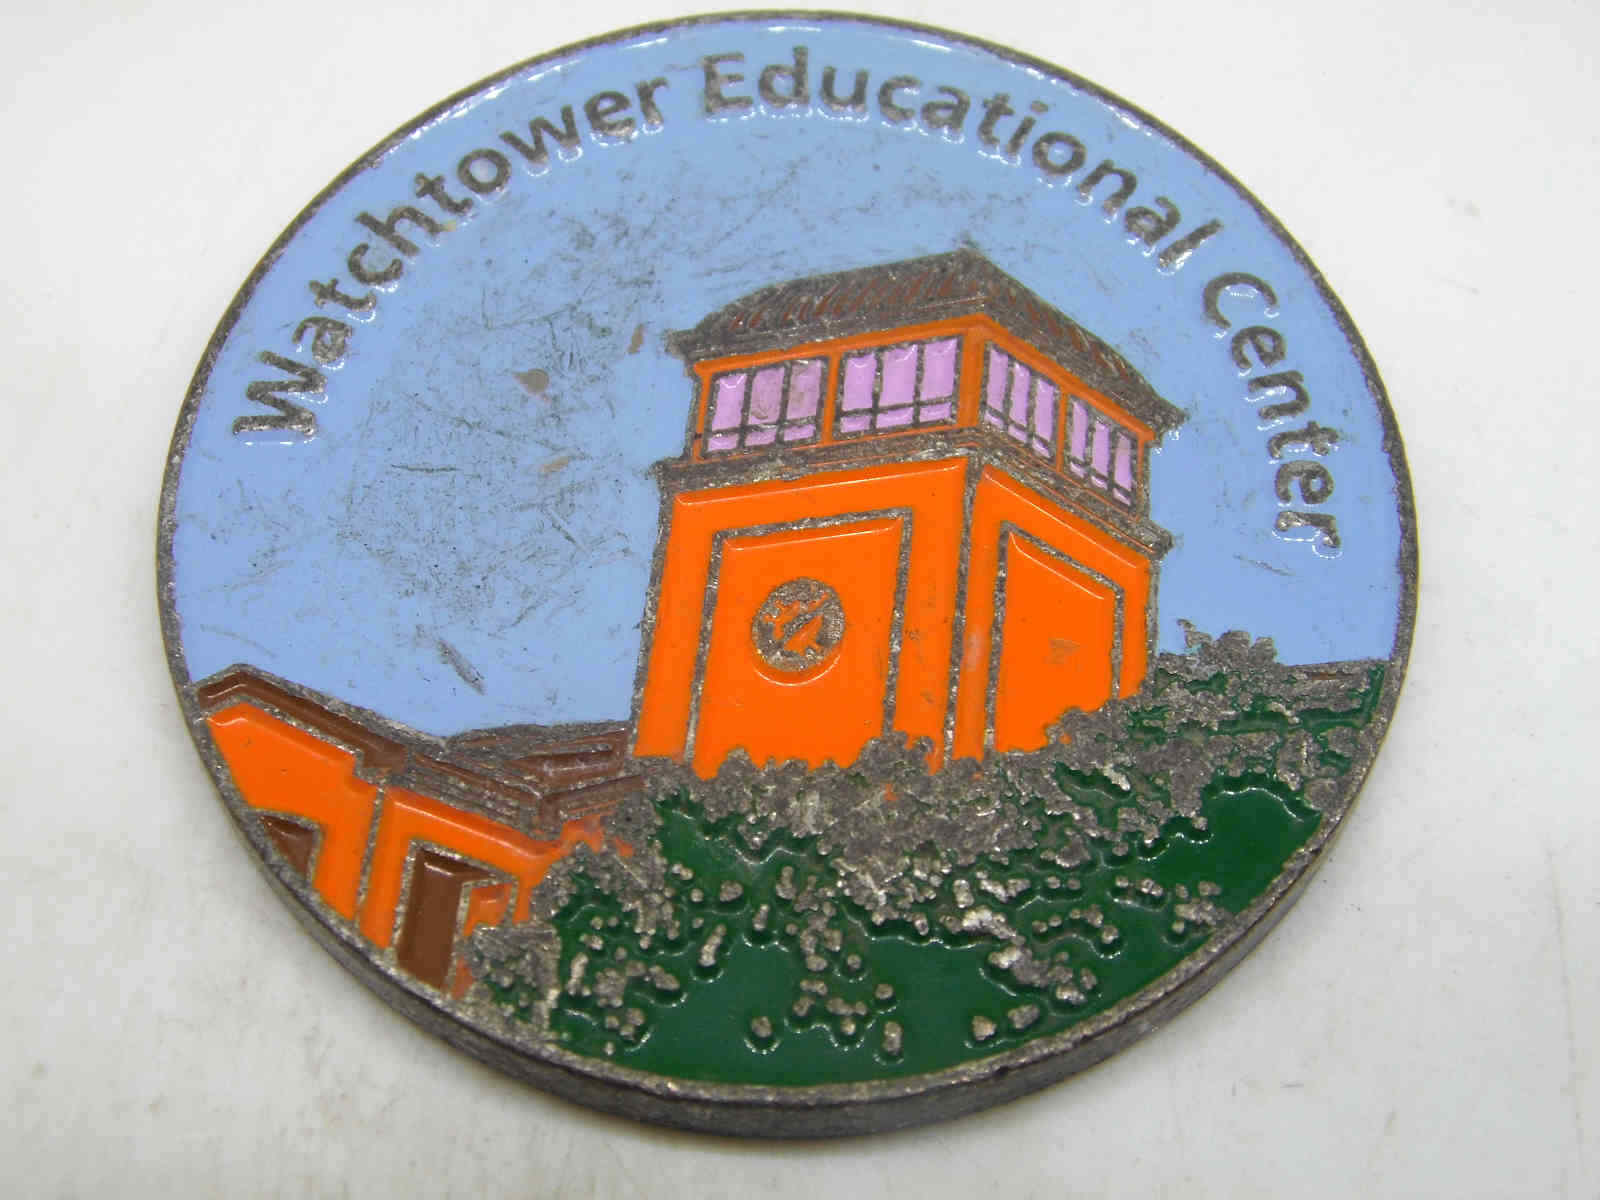 WATCHTOWER EDUCATIONAL CENTER PATTERSON WELD SHOP CHALLENGE COIN